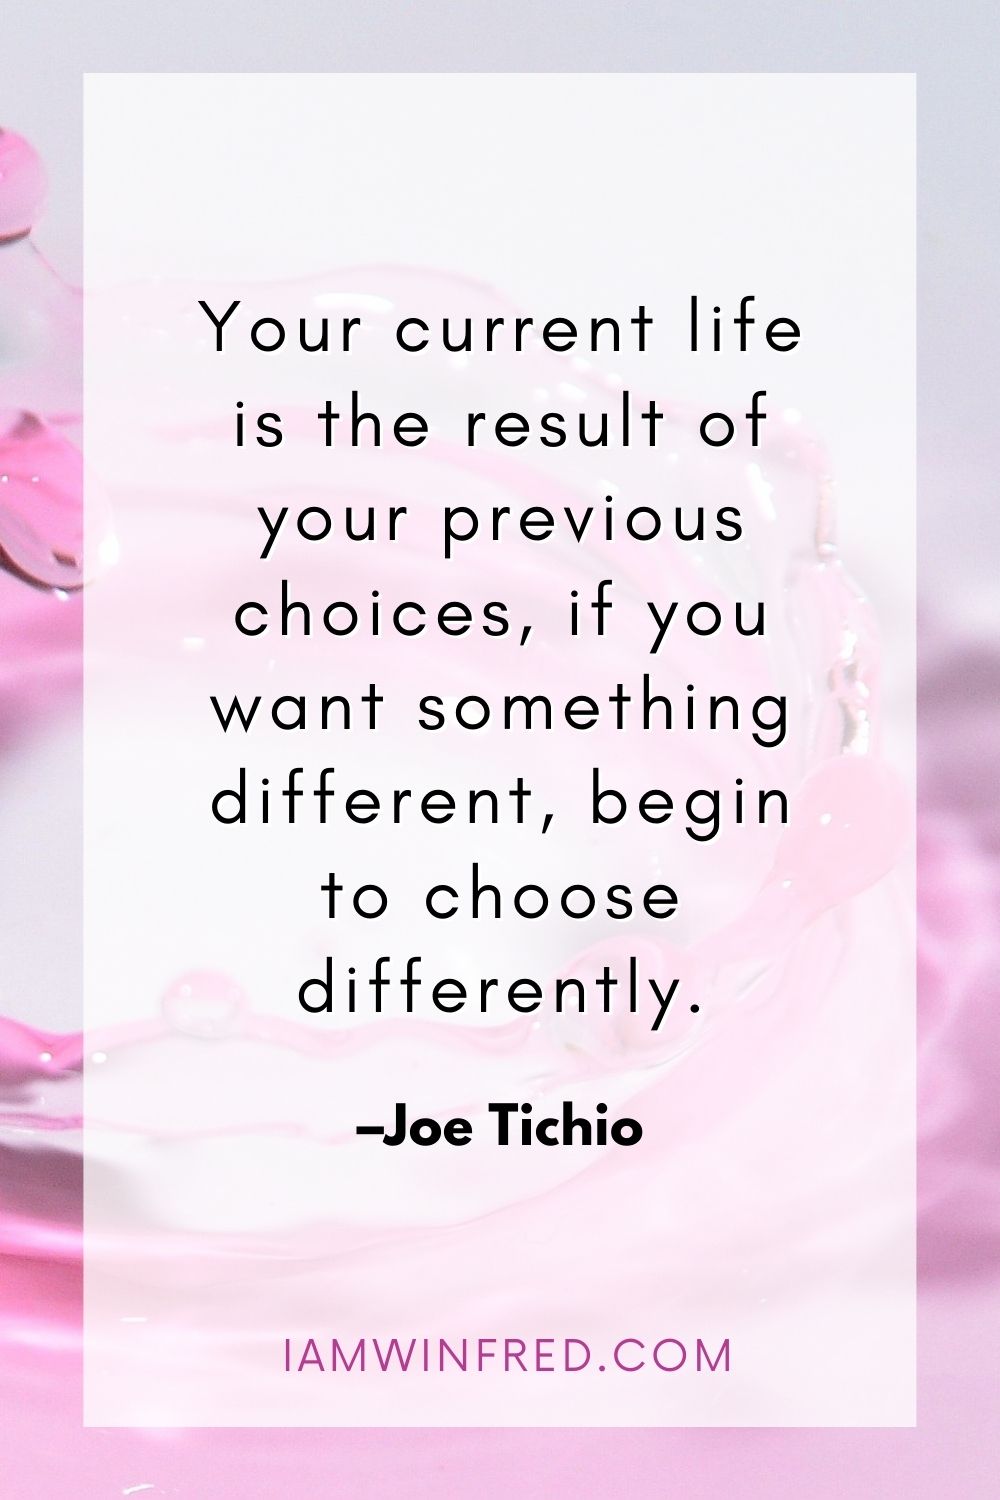 Your Current Life Is The Result Of Your Previous Choices If You Want Something Different Begin To Choose Differently.